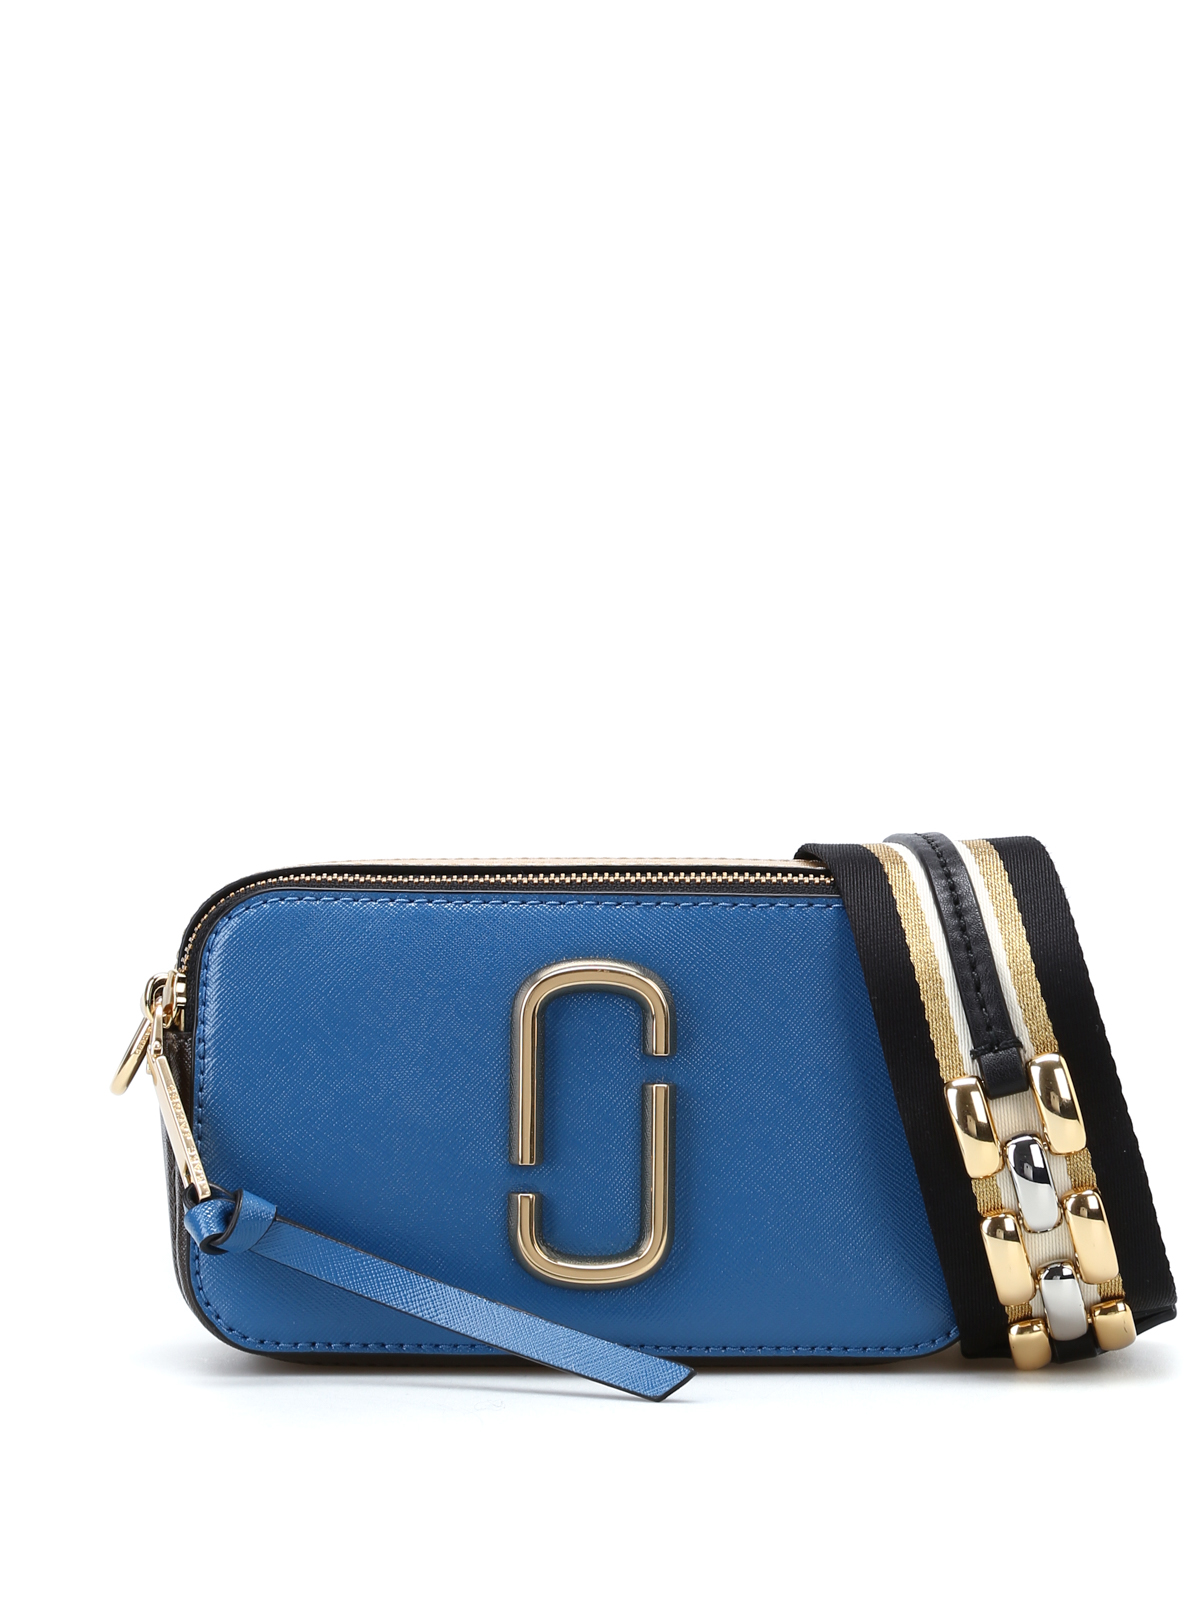 Cross body bags Marc Jacobs - Snapshot vintage blue small bag - M0013538497